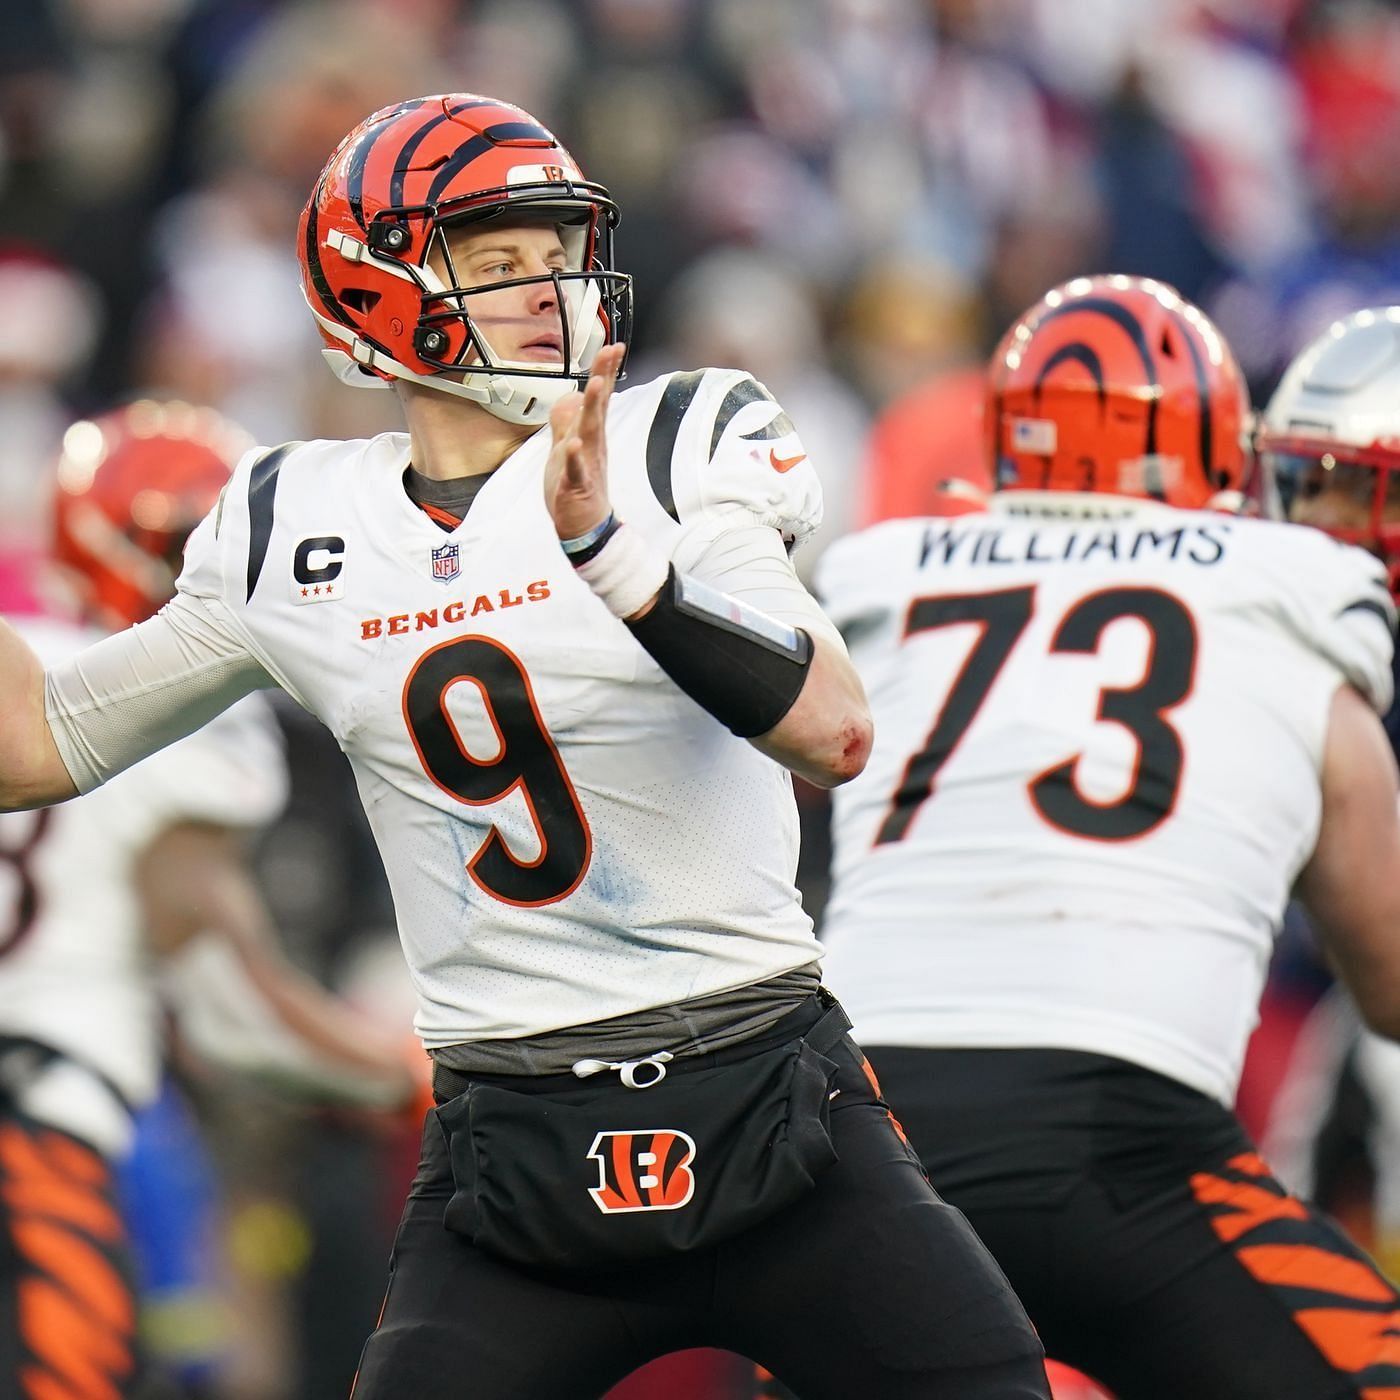 Joe Burrow started his professional career in 2020 with the Bengals (Image via USA Today)